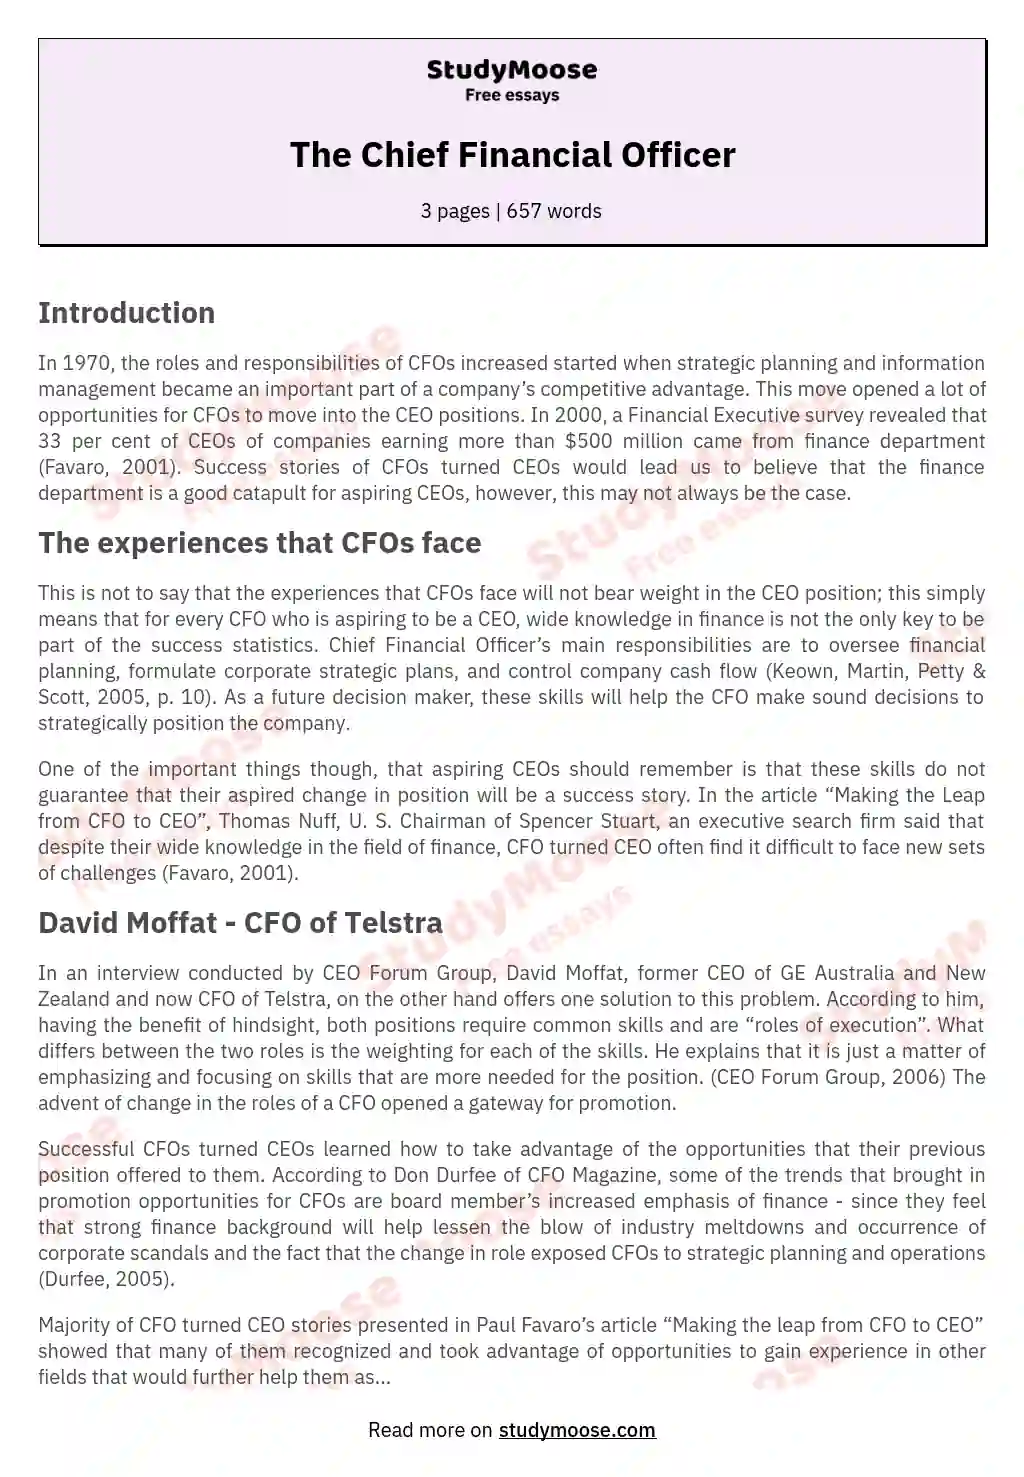 The Chief Financial Officer essay